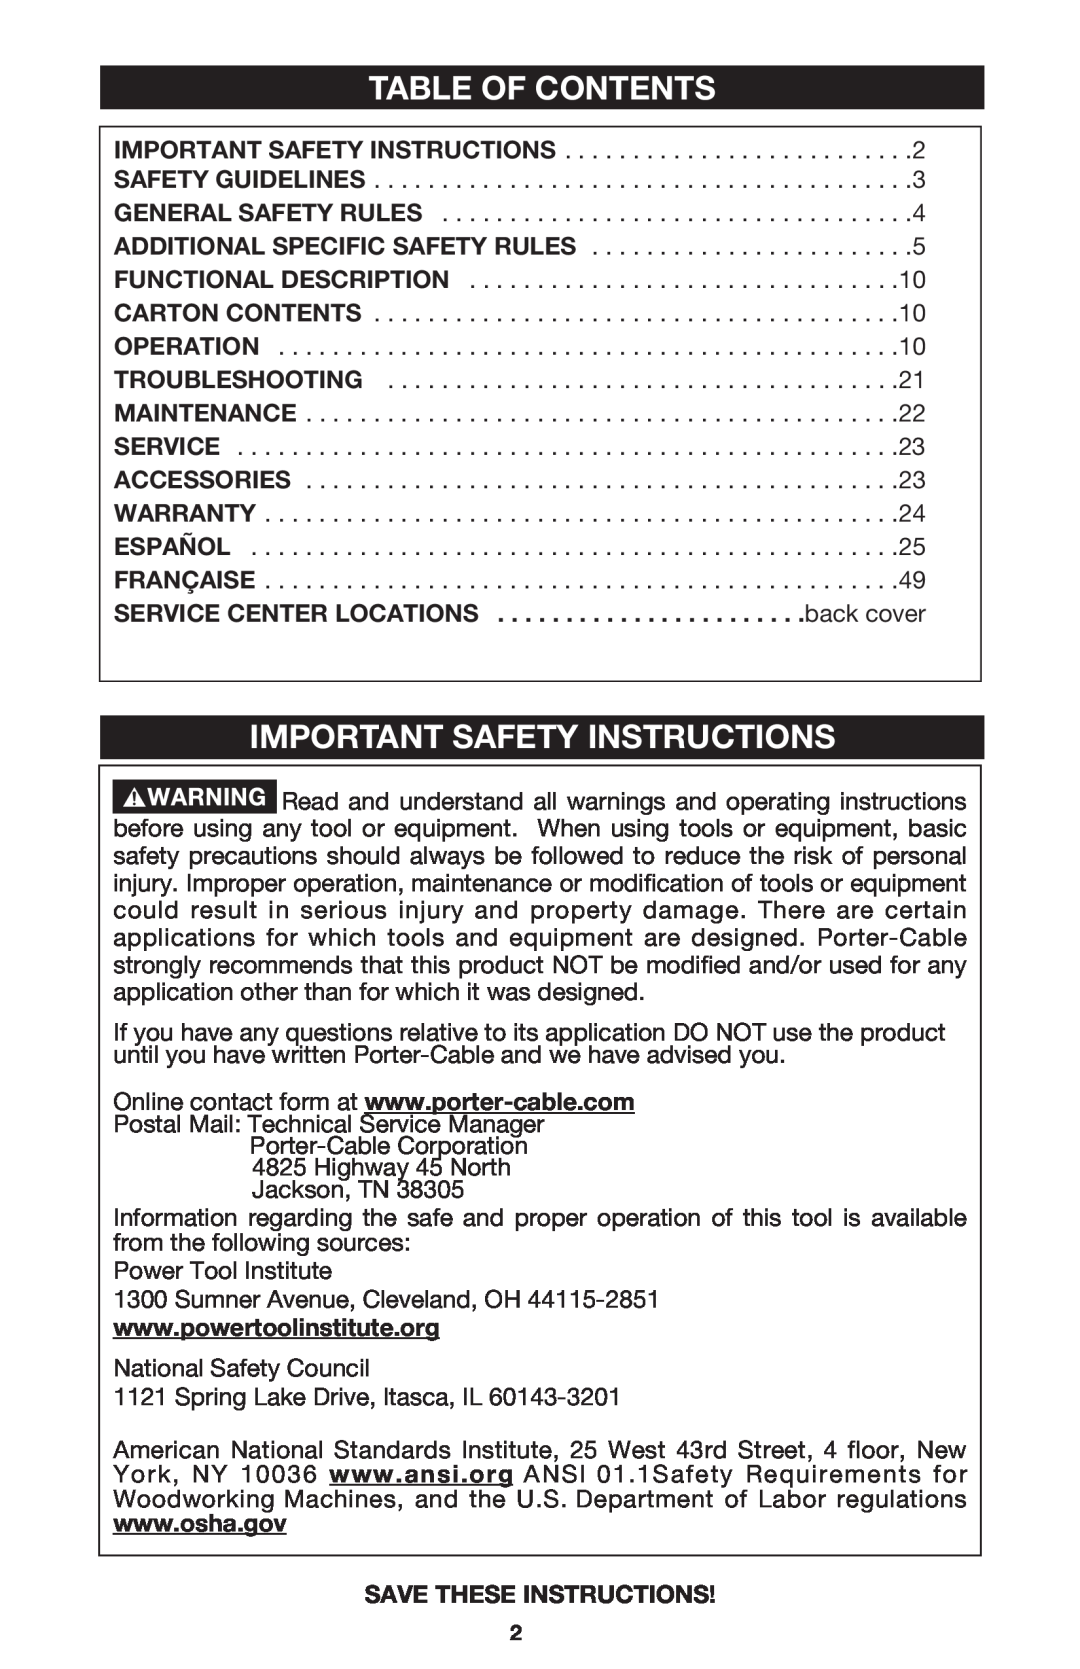 Porter-Cable 7310 instruction manual Table Of Contents, Important Safety Instructions 